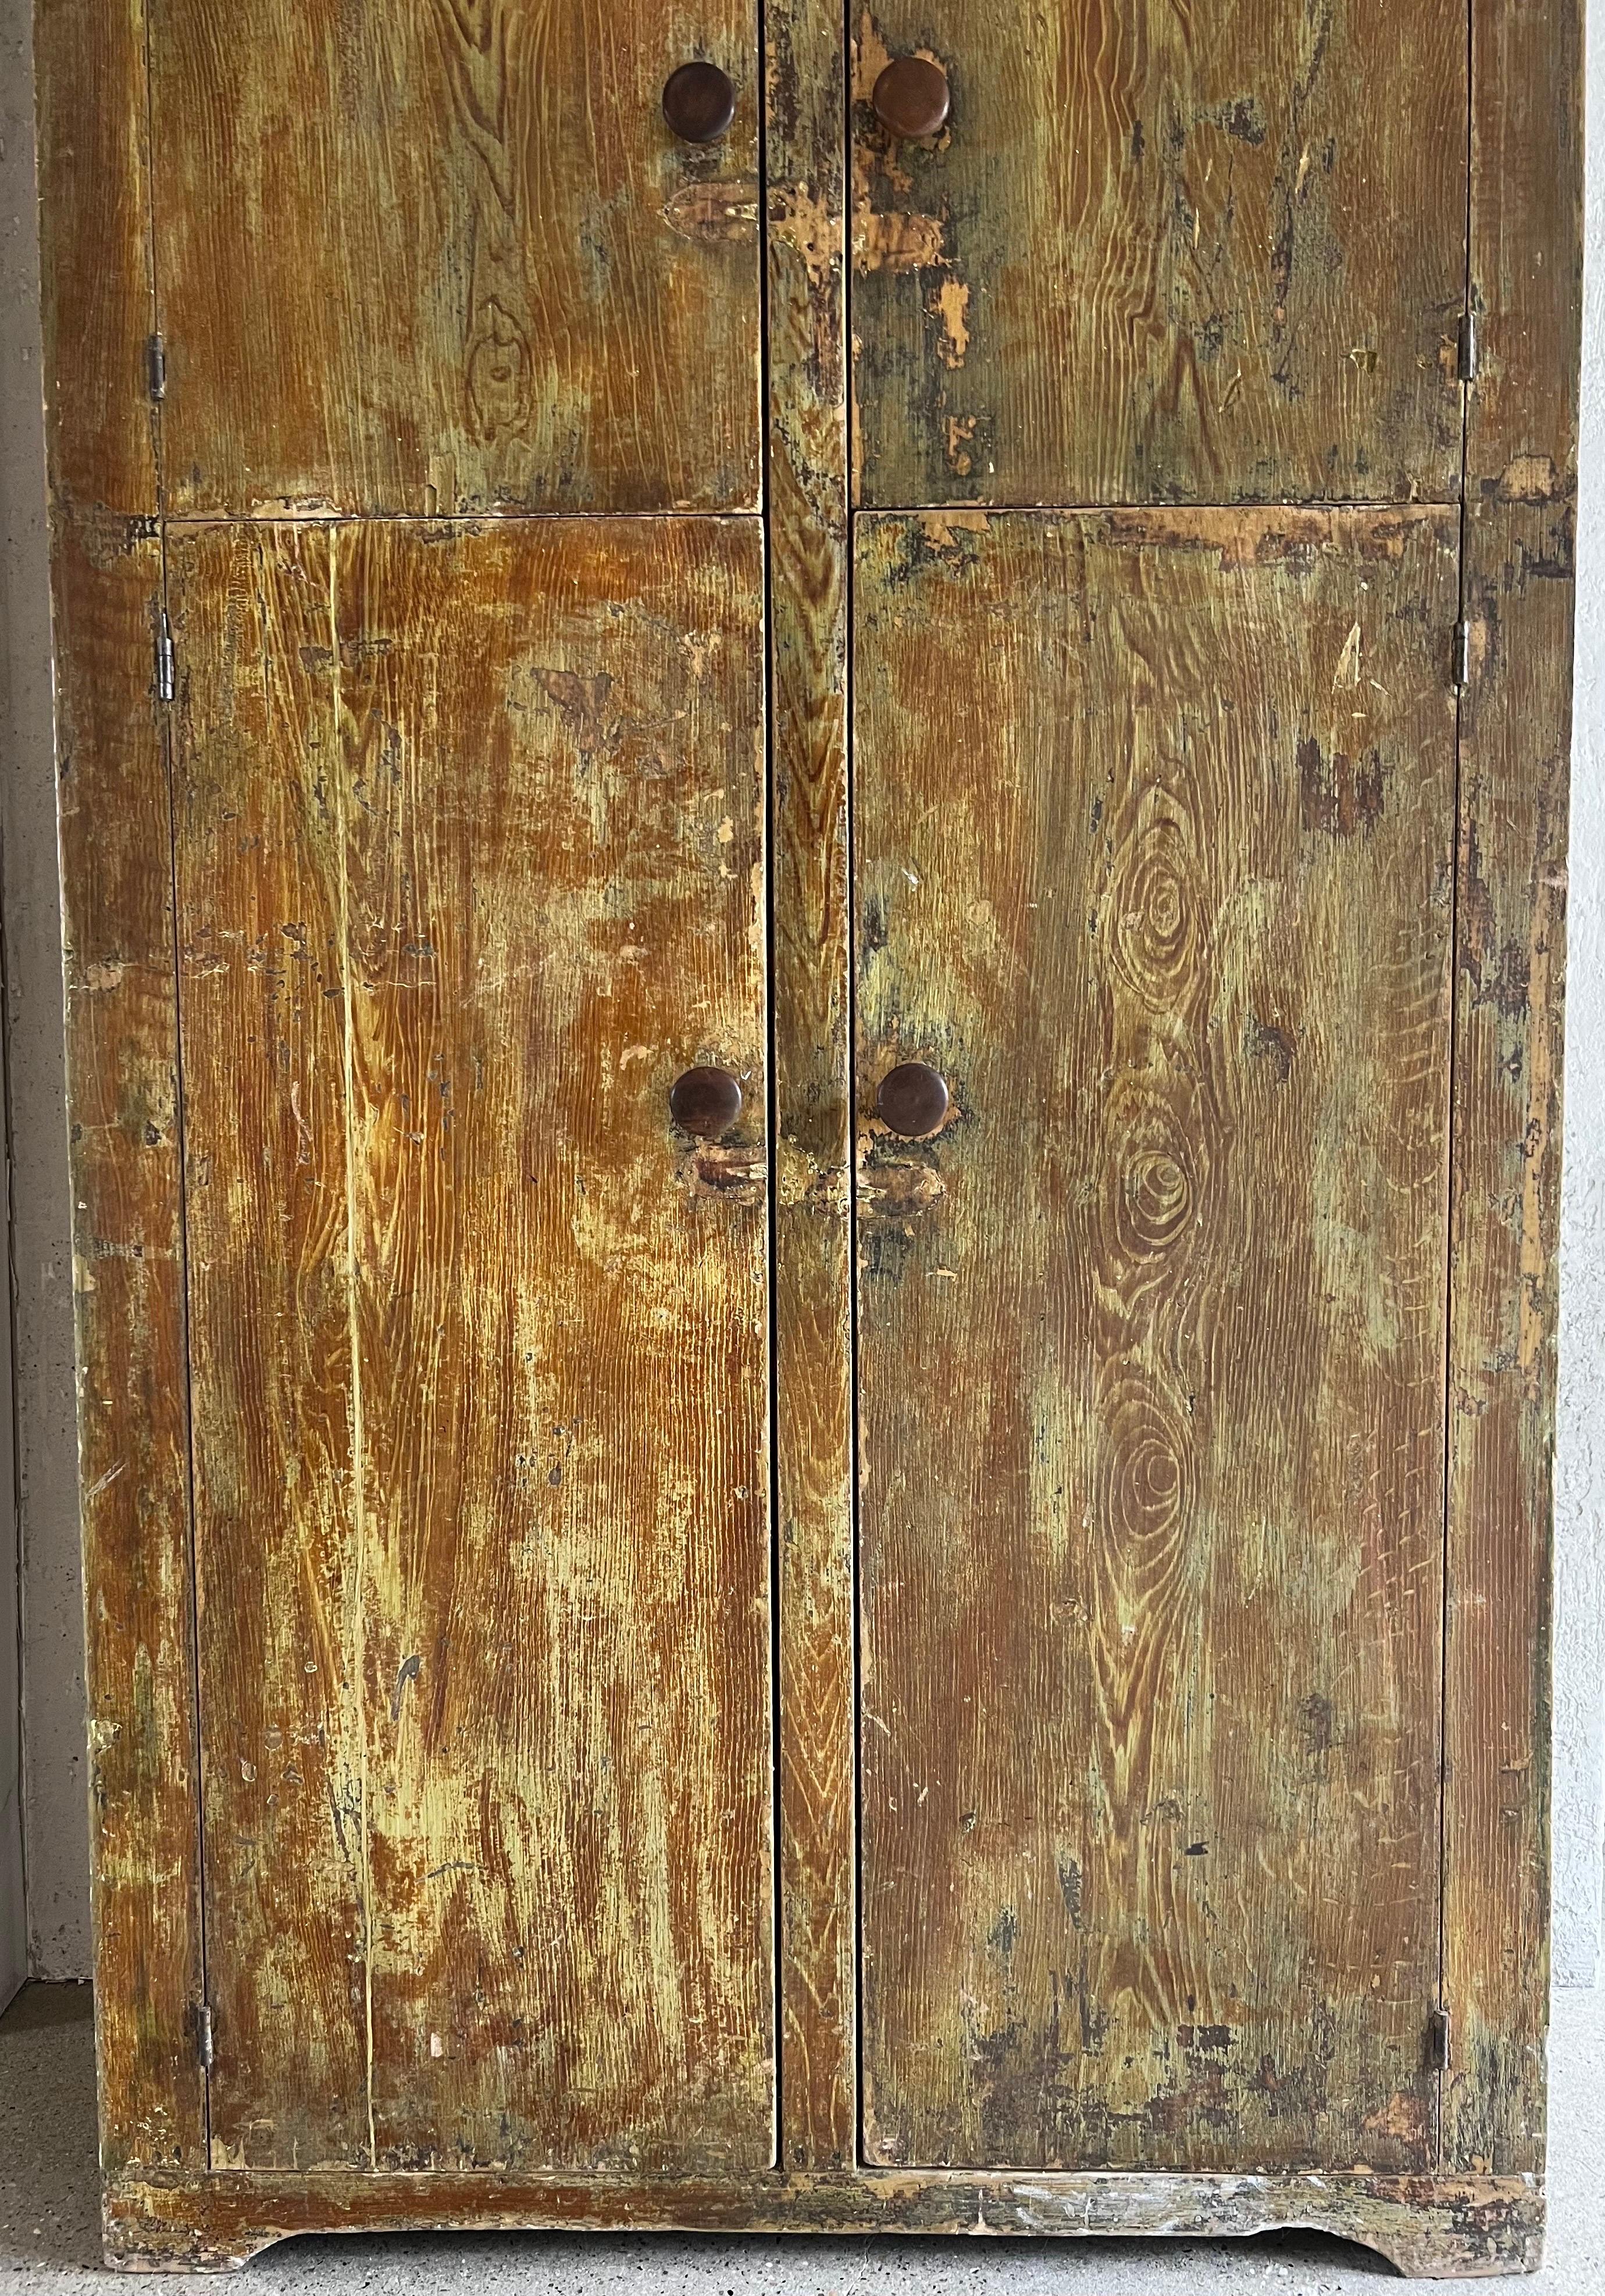 Gorgeous patina is the highlight of this Early 20th Century American Cupboard / Cabinet. The layers of paint have been worn over time allowing the most interesting of colorations. Sturdy, well maintained for its age, the piece would be wonderful in